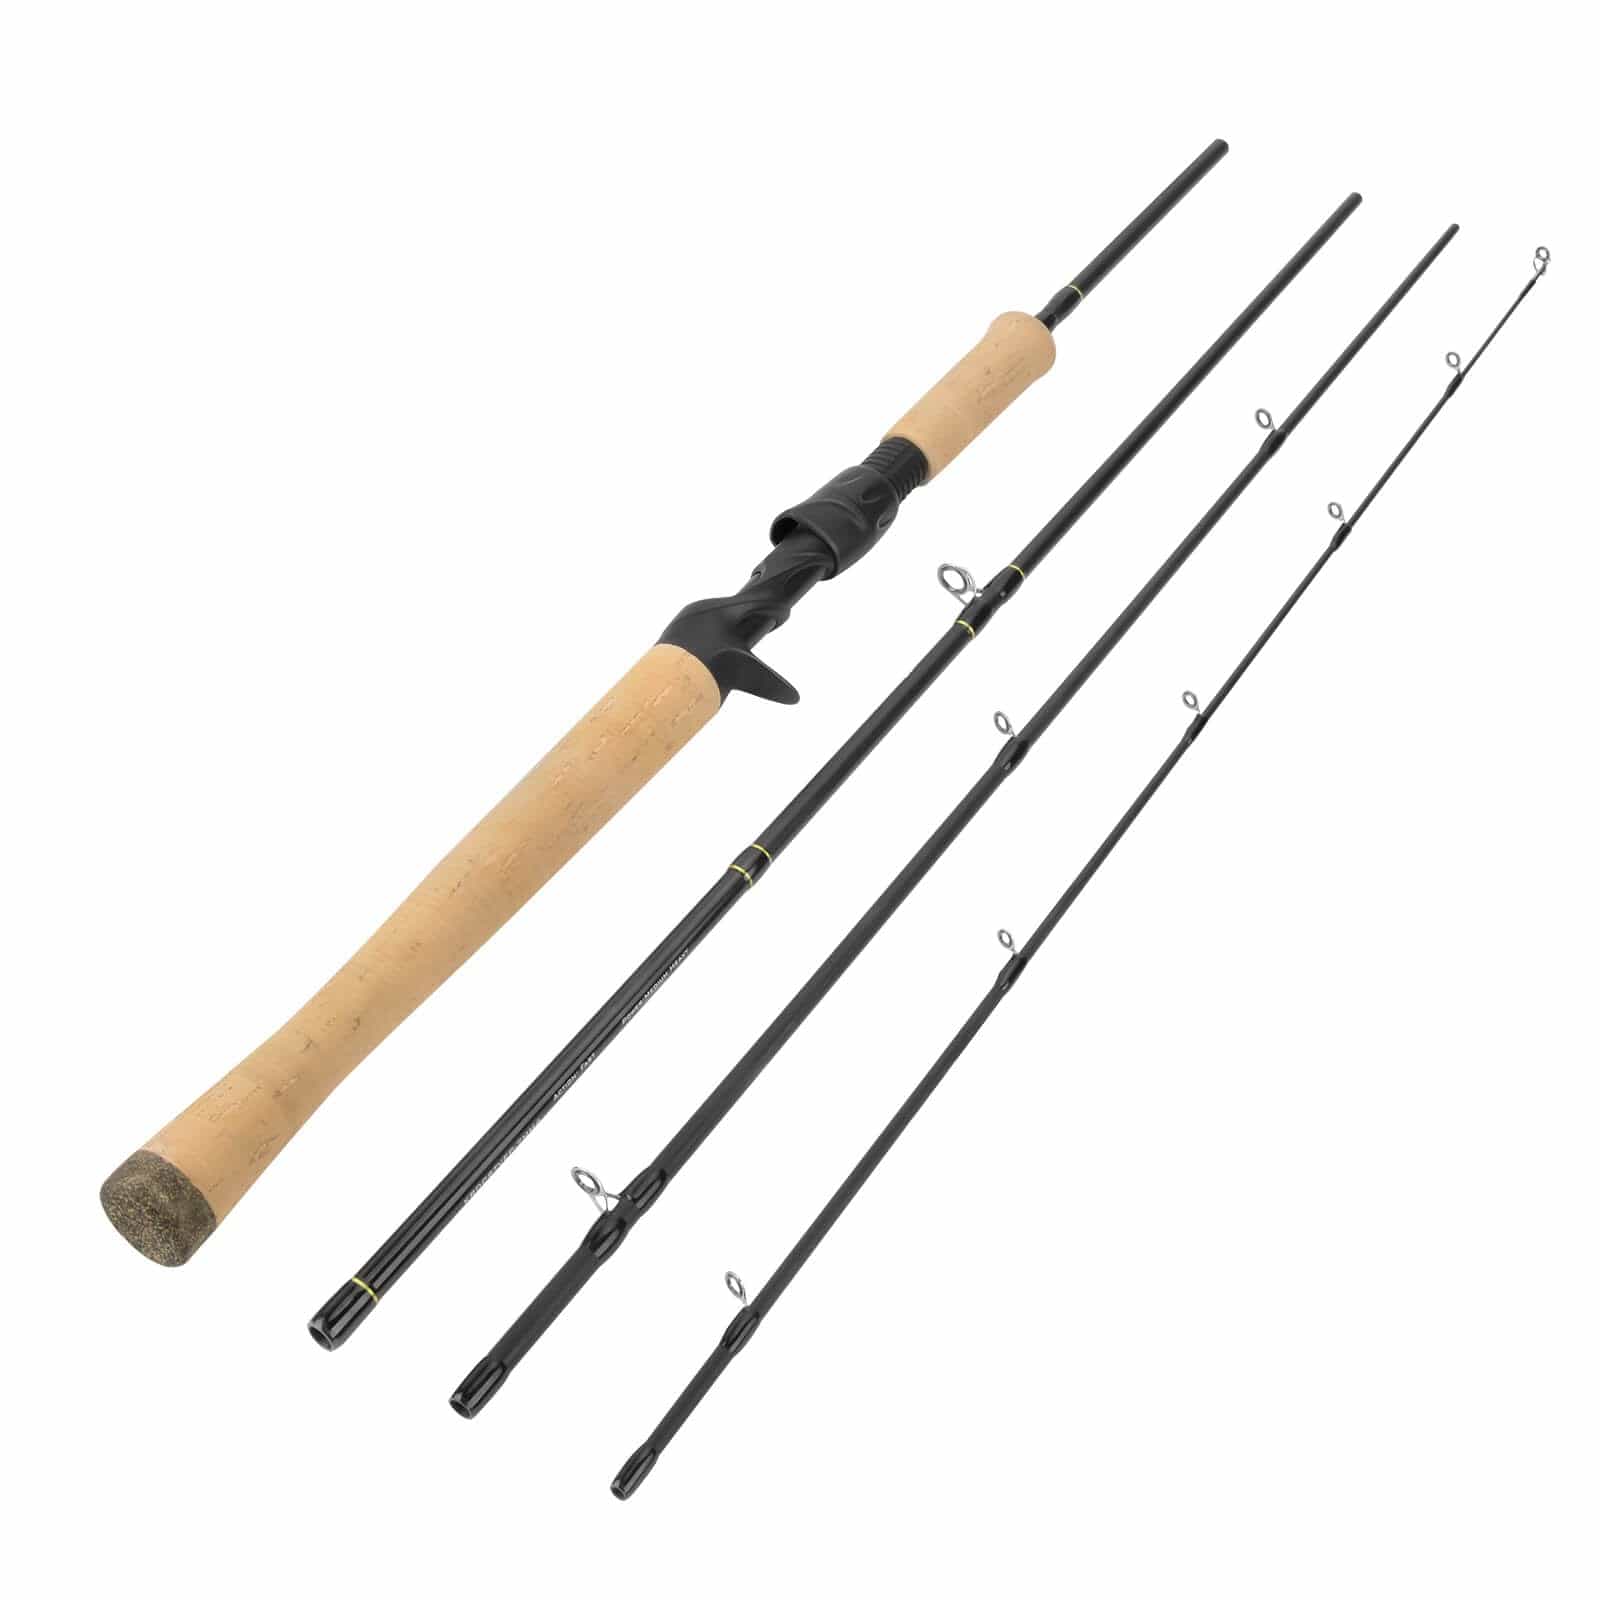 KastKing KROME RODS for Steelhead and Salmon!!!These rods feature